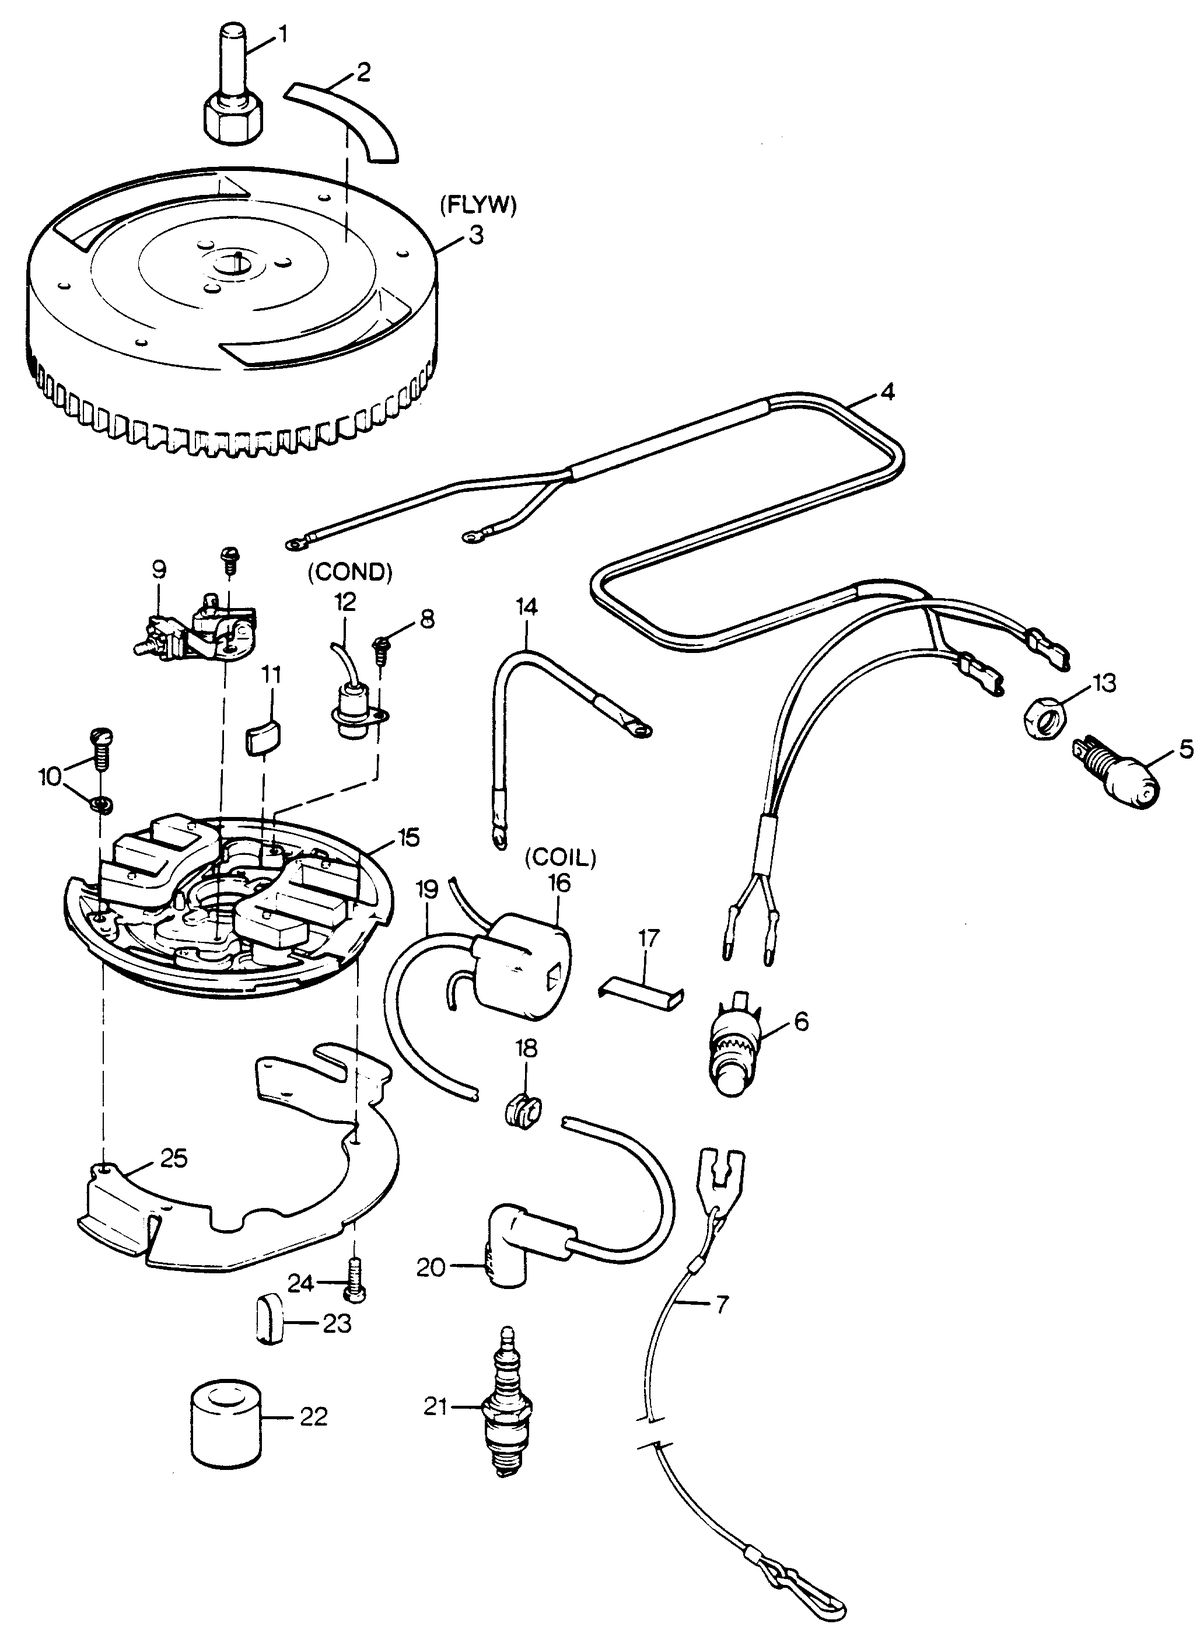 SEARS SEARS 15 H.P. IGNITION SYSTEM